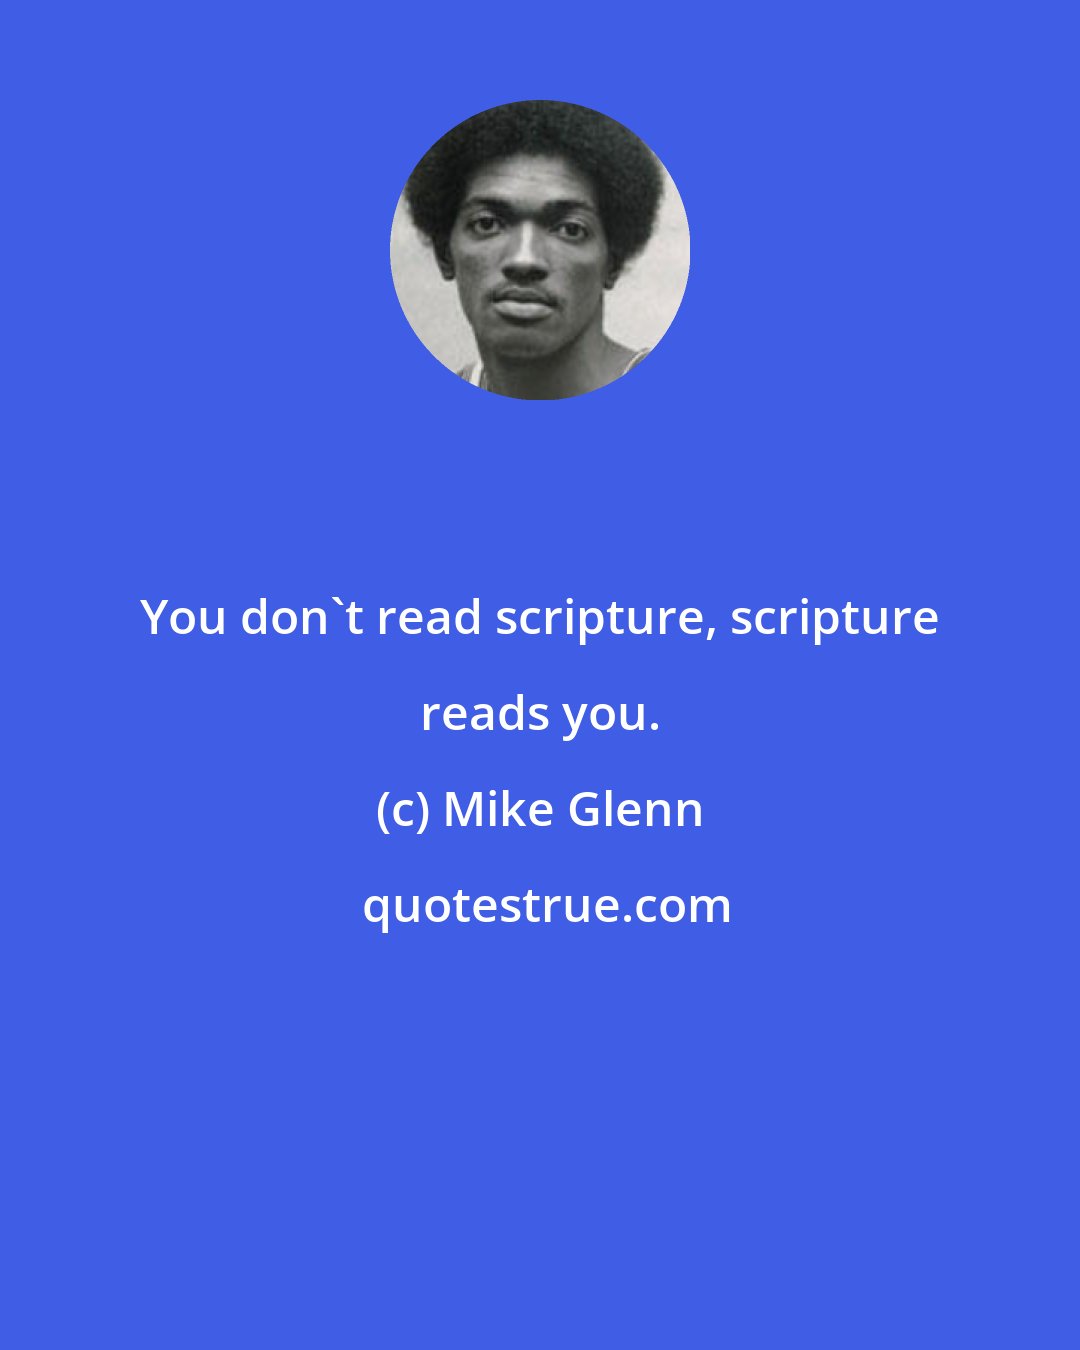 Mike Glenn: You don't read scripture, scripture reads you.